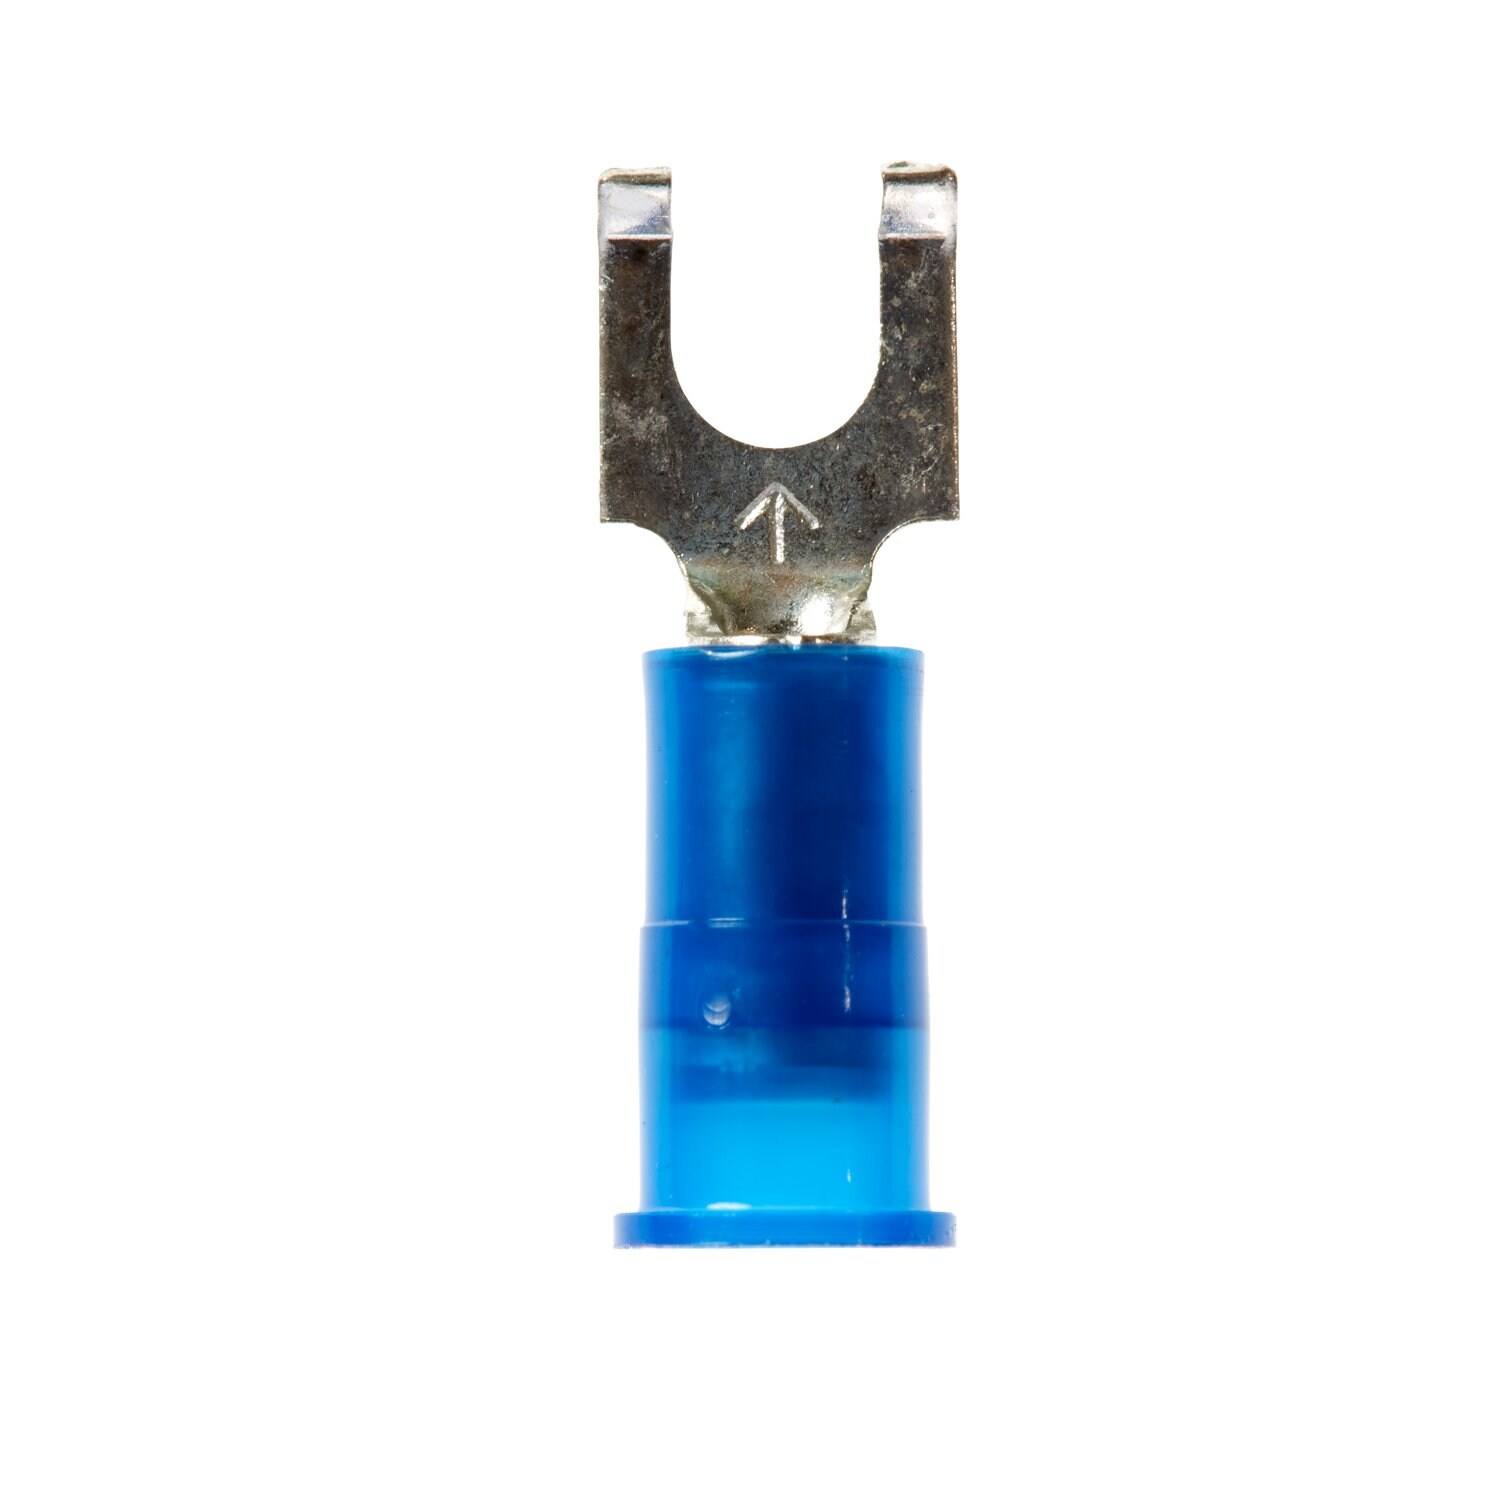 7100165312 - 3M Scotchlok Flanged Block Fork Nylon Insulated, 100/bottle,
MNG14-8FFBX, suitable for use in a terminal block, 500/Case